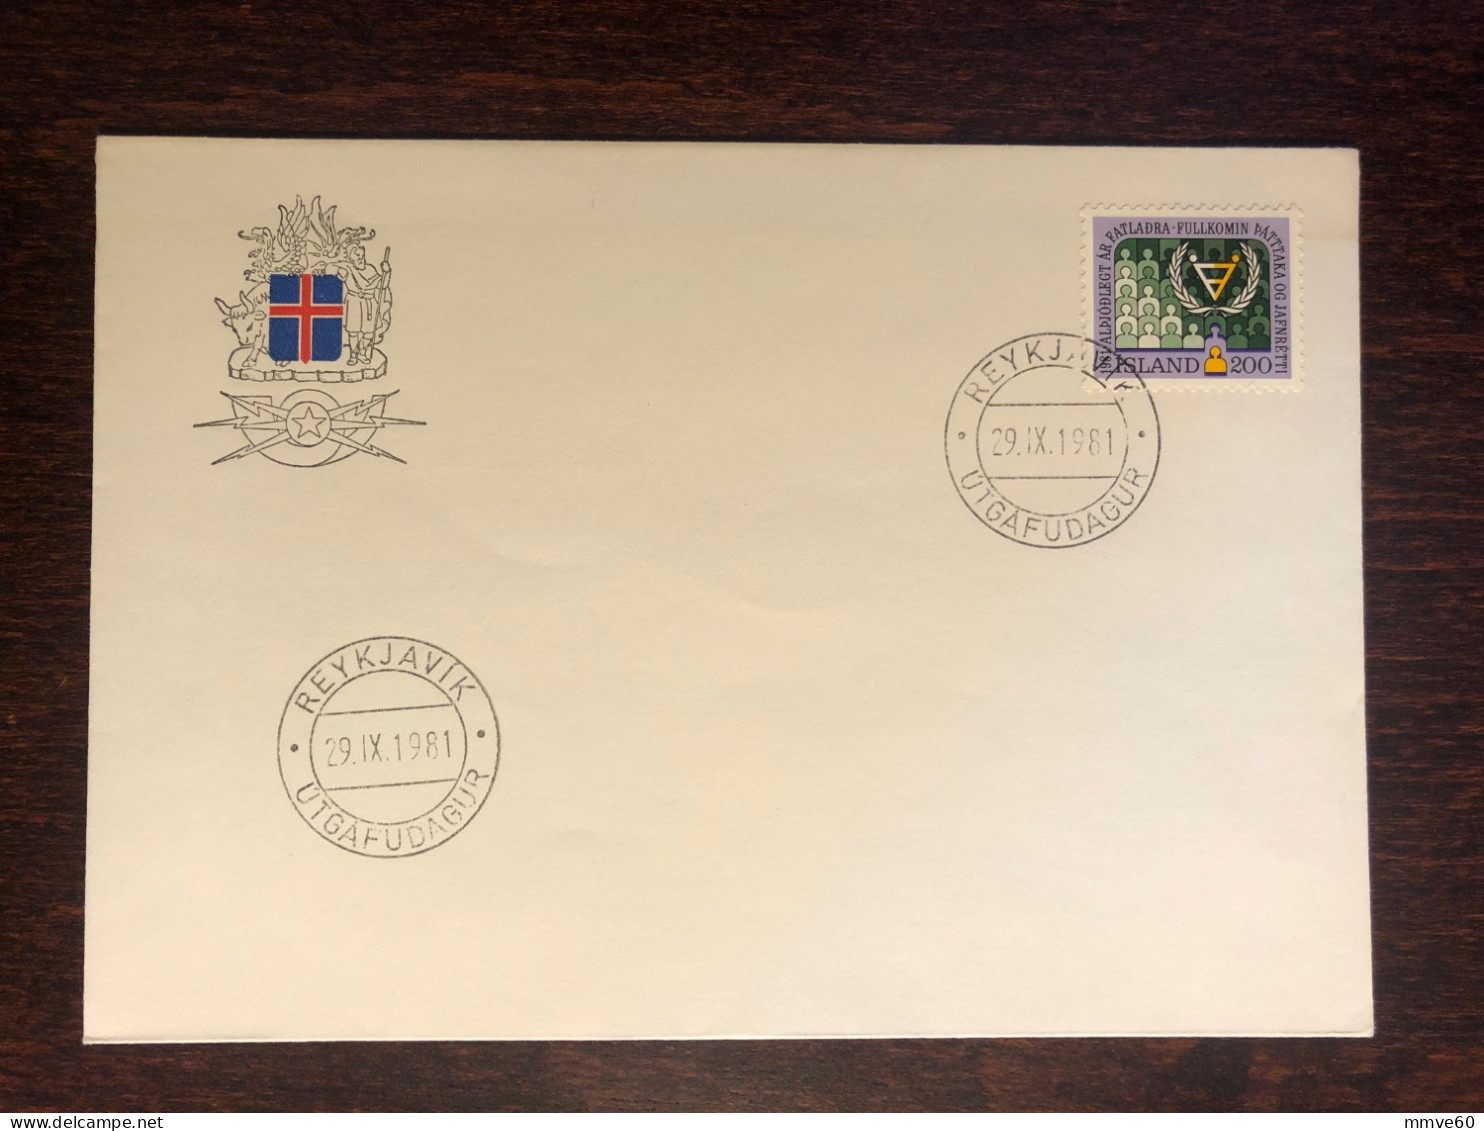 ICELAND FDC COVER 1981 YEAR DISABLED PEOPLE HEALTH MEDICINE STAMPS - FDC